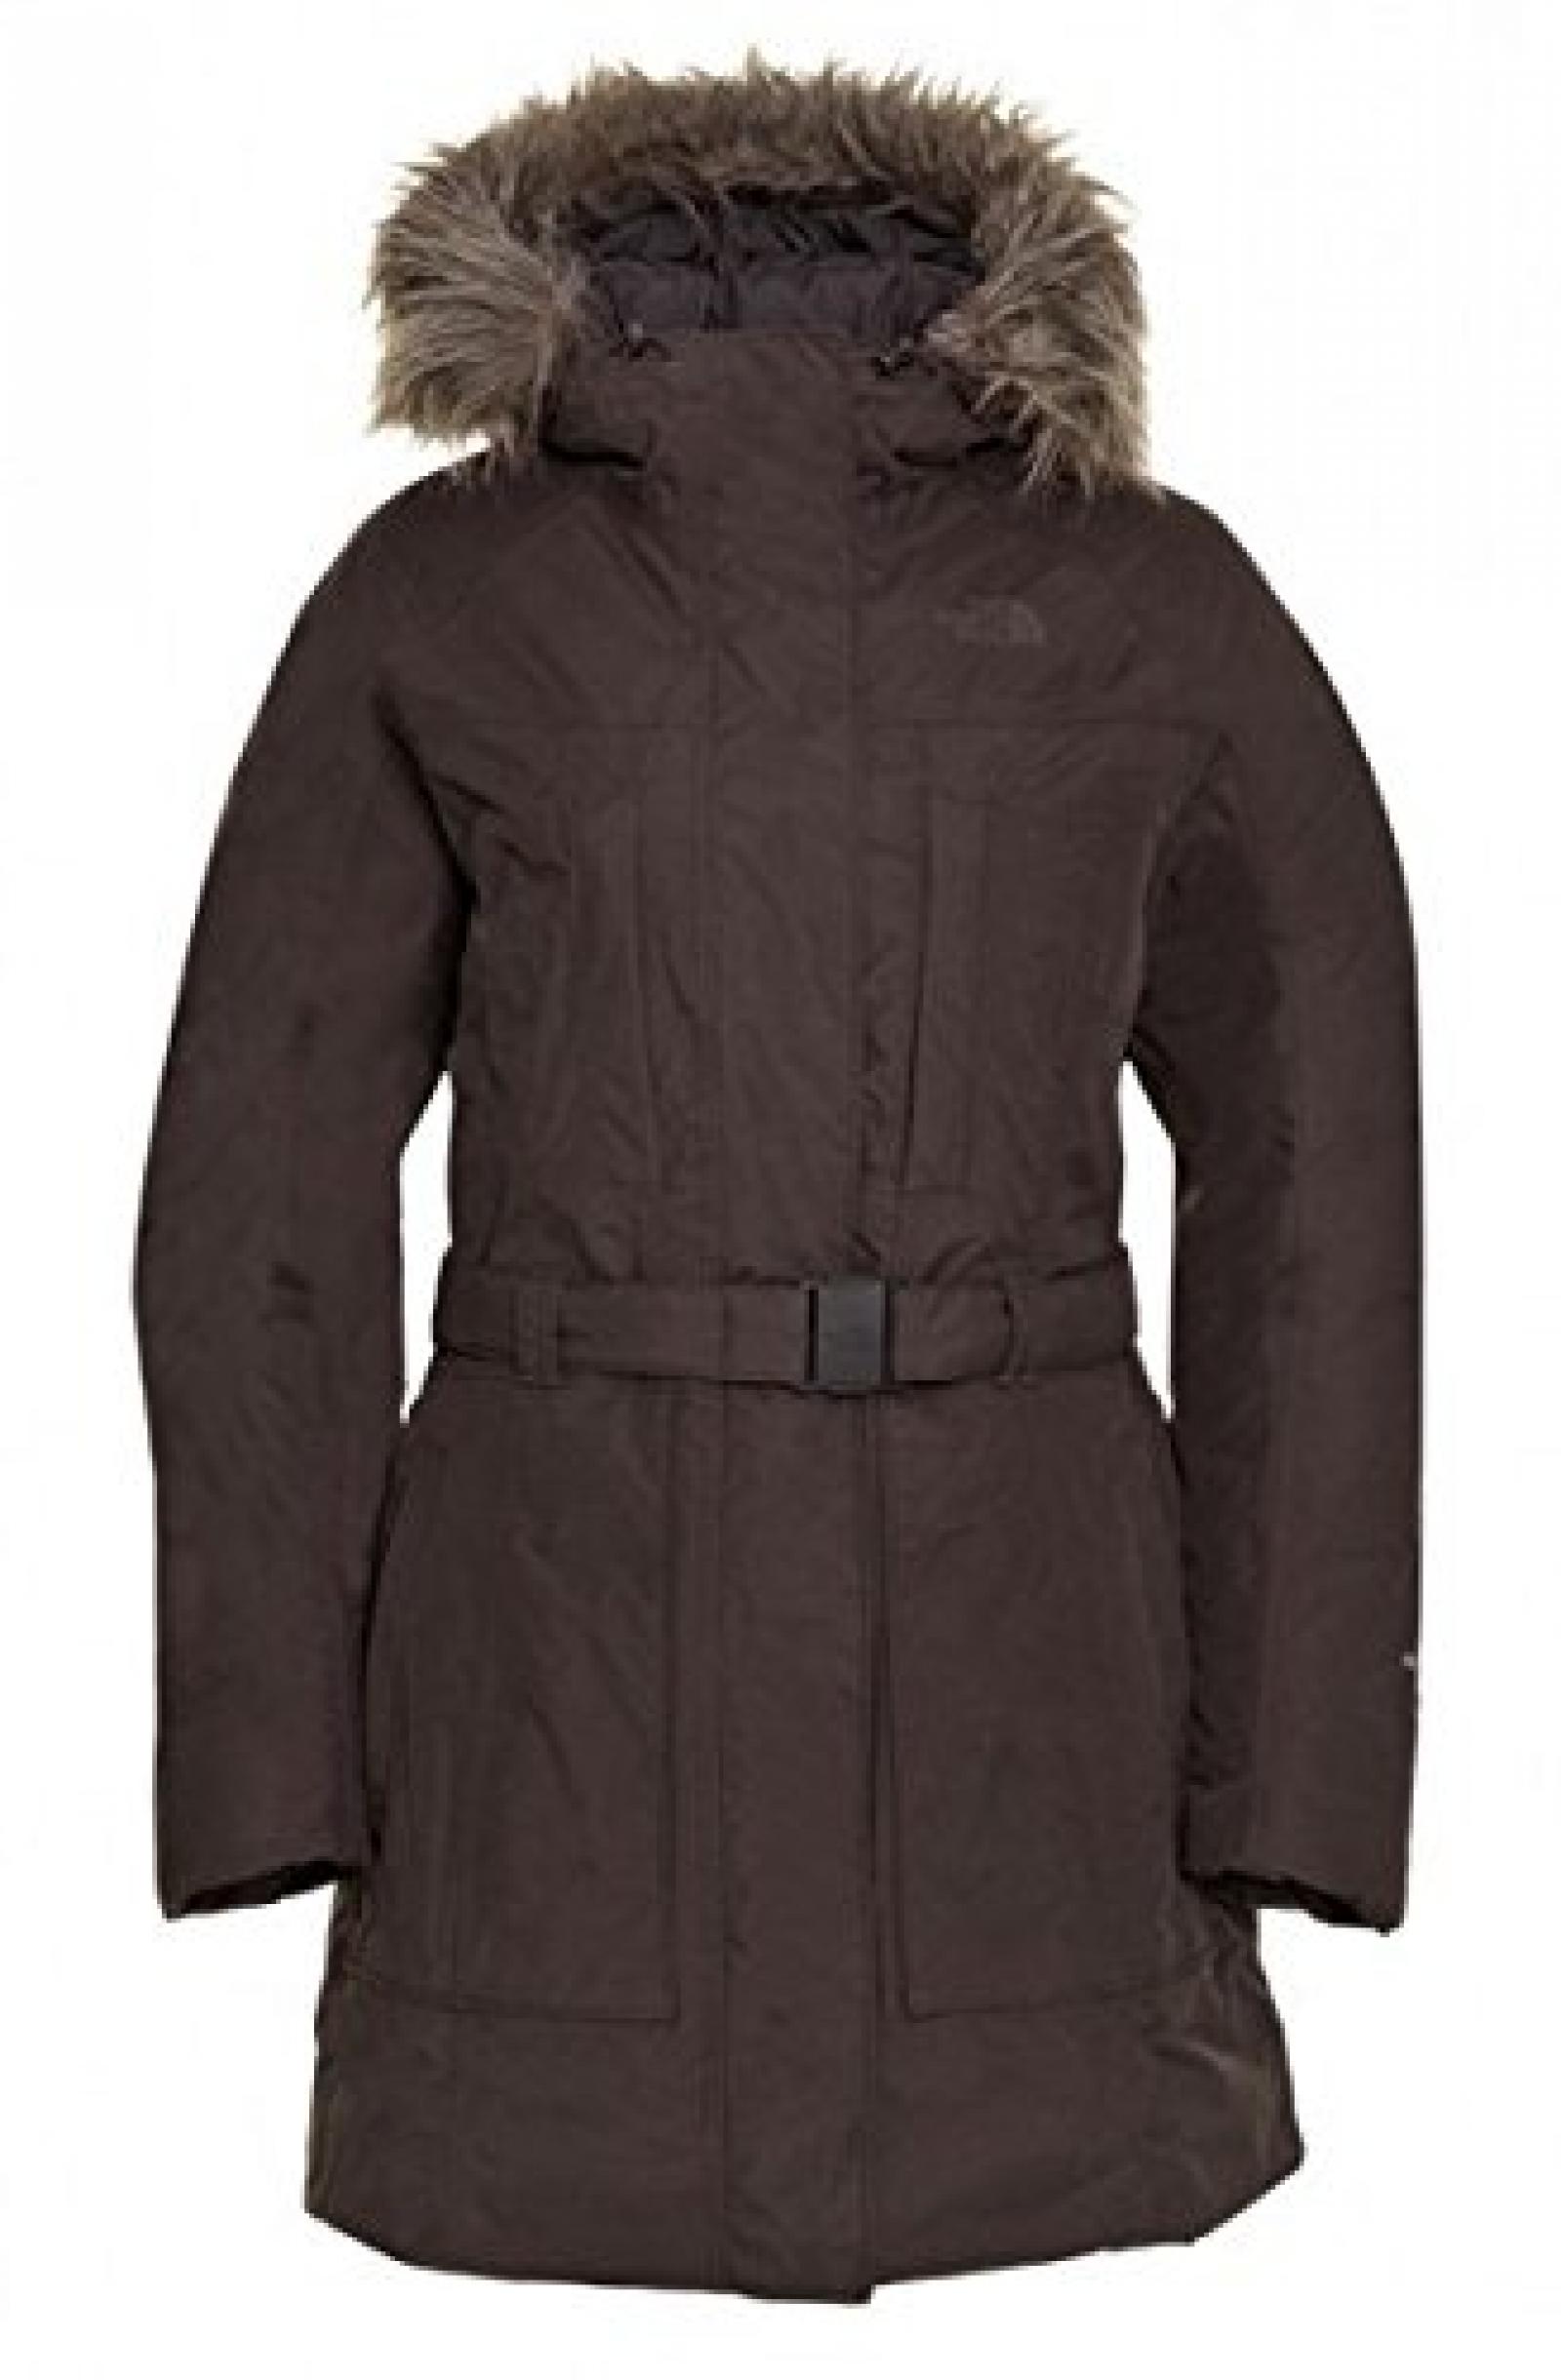 The North Face Womens Brooklyn Jacket bittersweet brown 